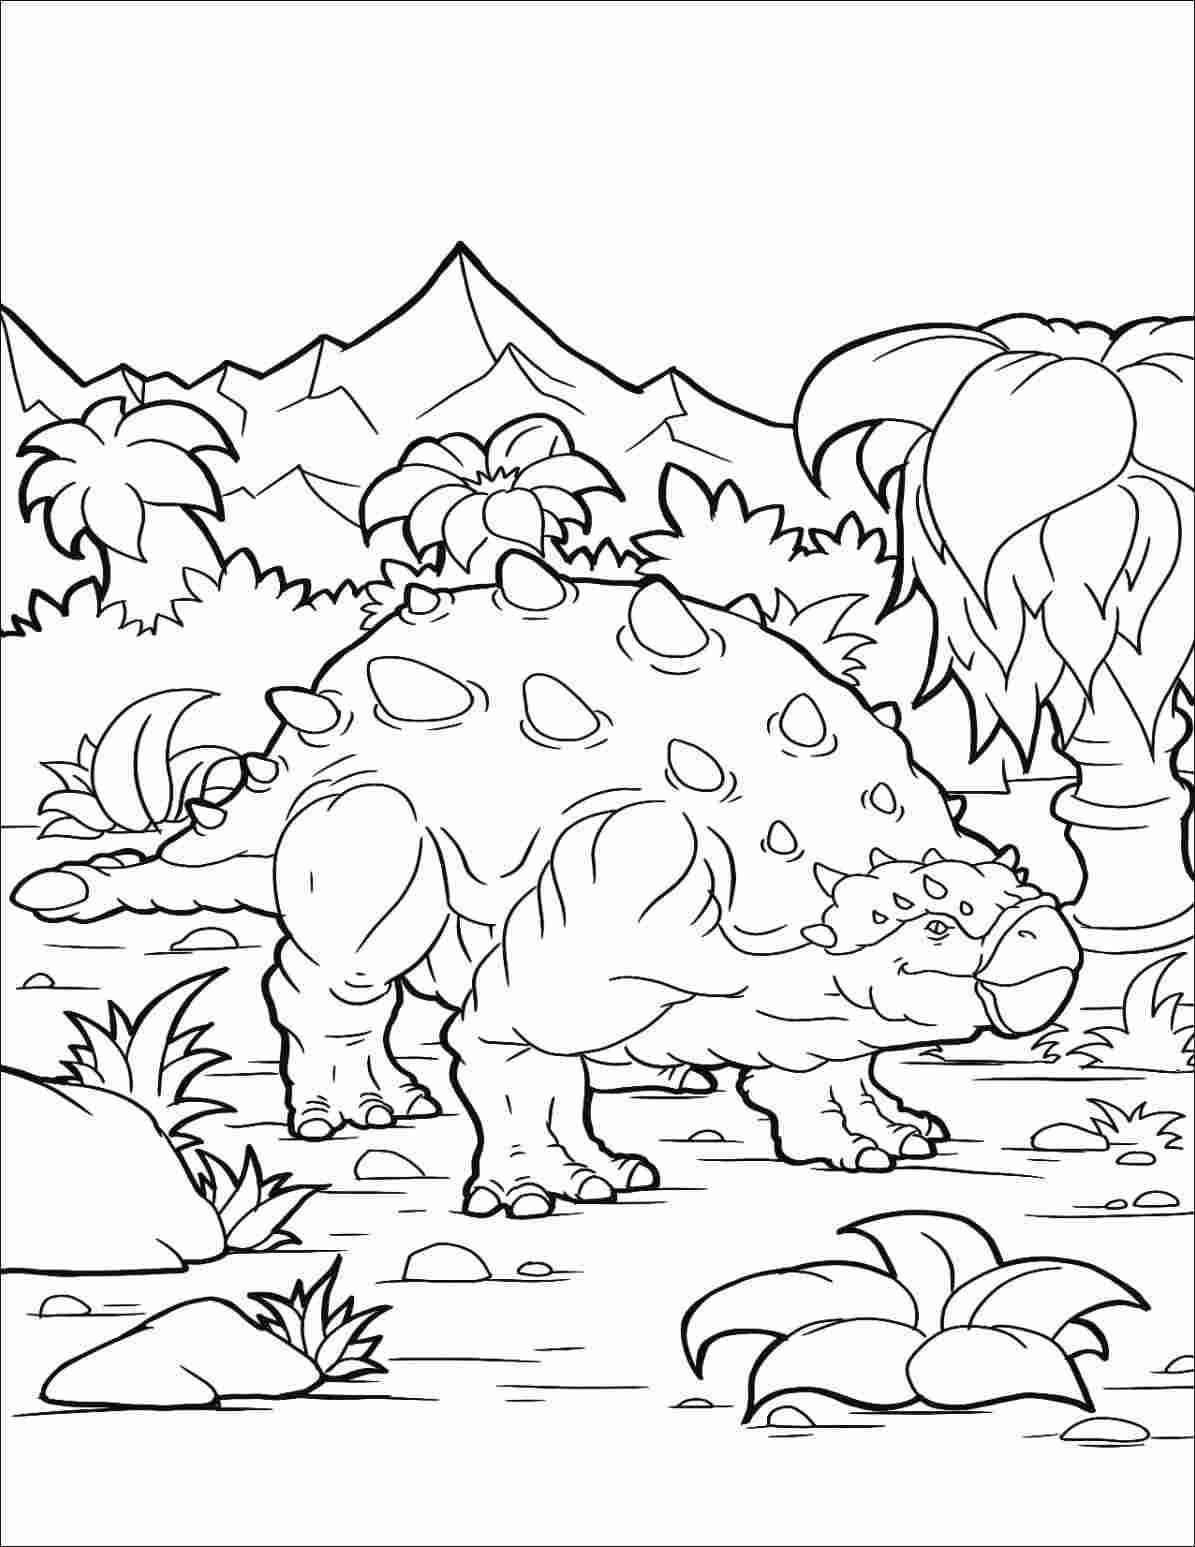 Ankylosaurus has horns on its back Coloring Page